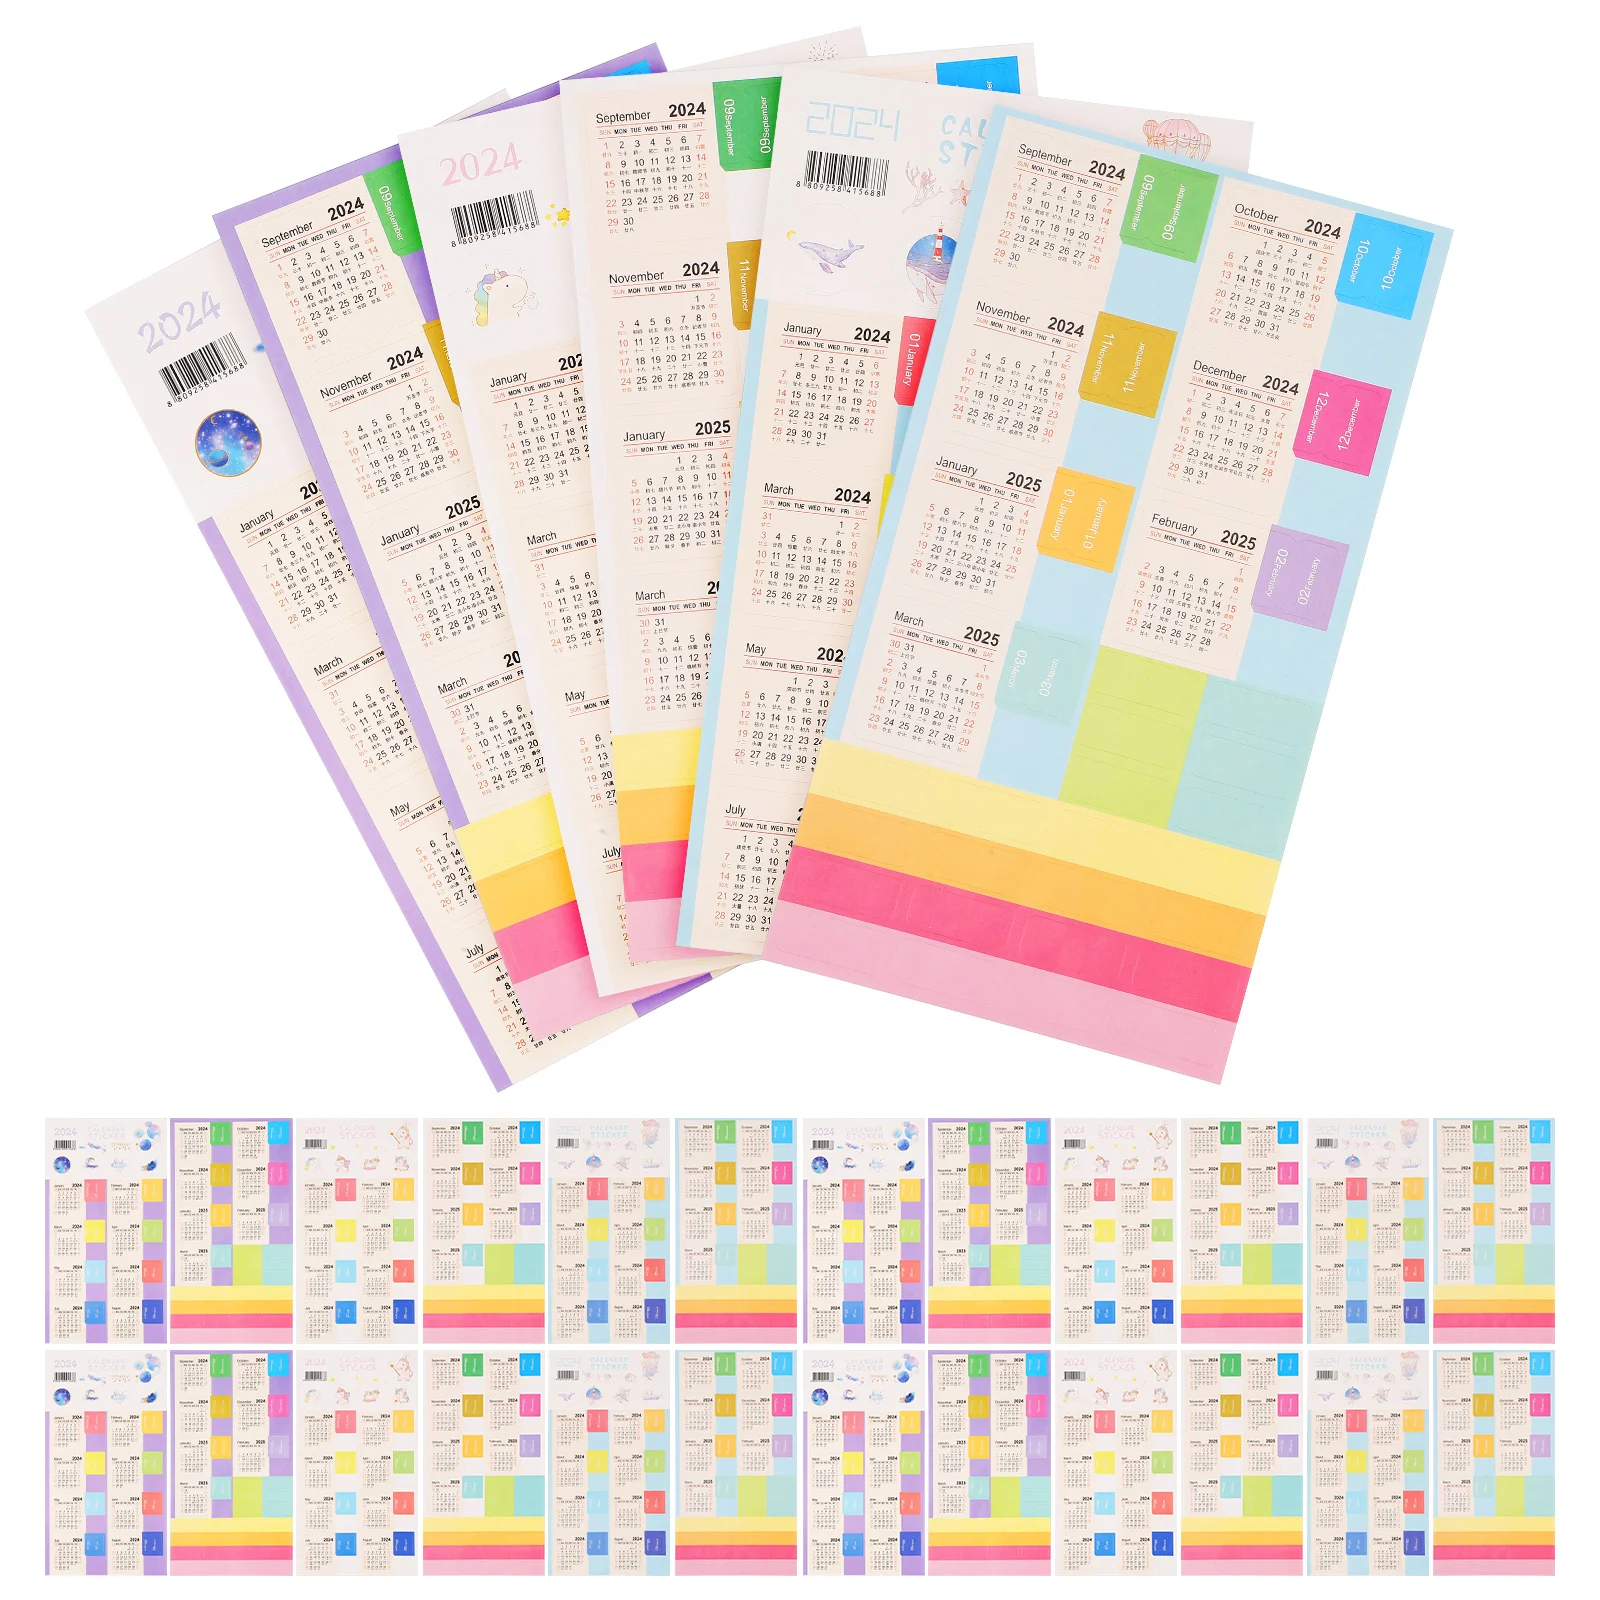 15 Sets Planner Stickers Calendar Month Stickers Book Tabs Notepad Calendar Stickers Index Tabs 4 sets of calendar stickers planner index stickers calendar index stickers notebook stickers